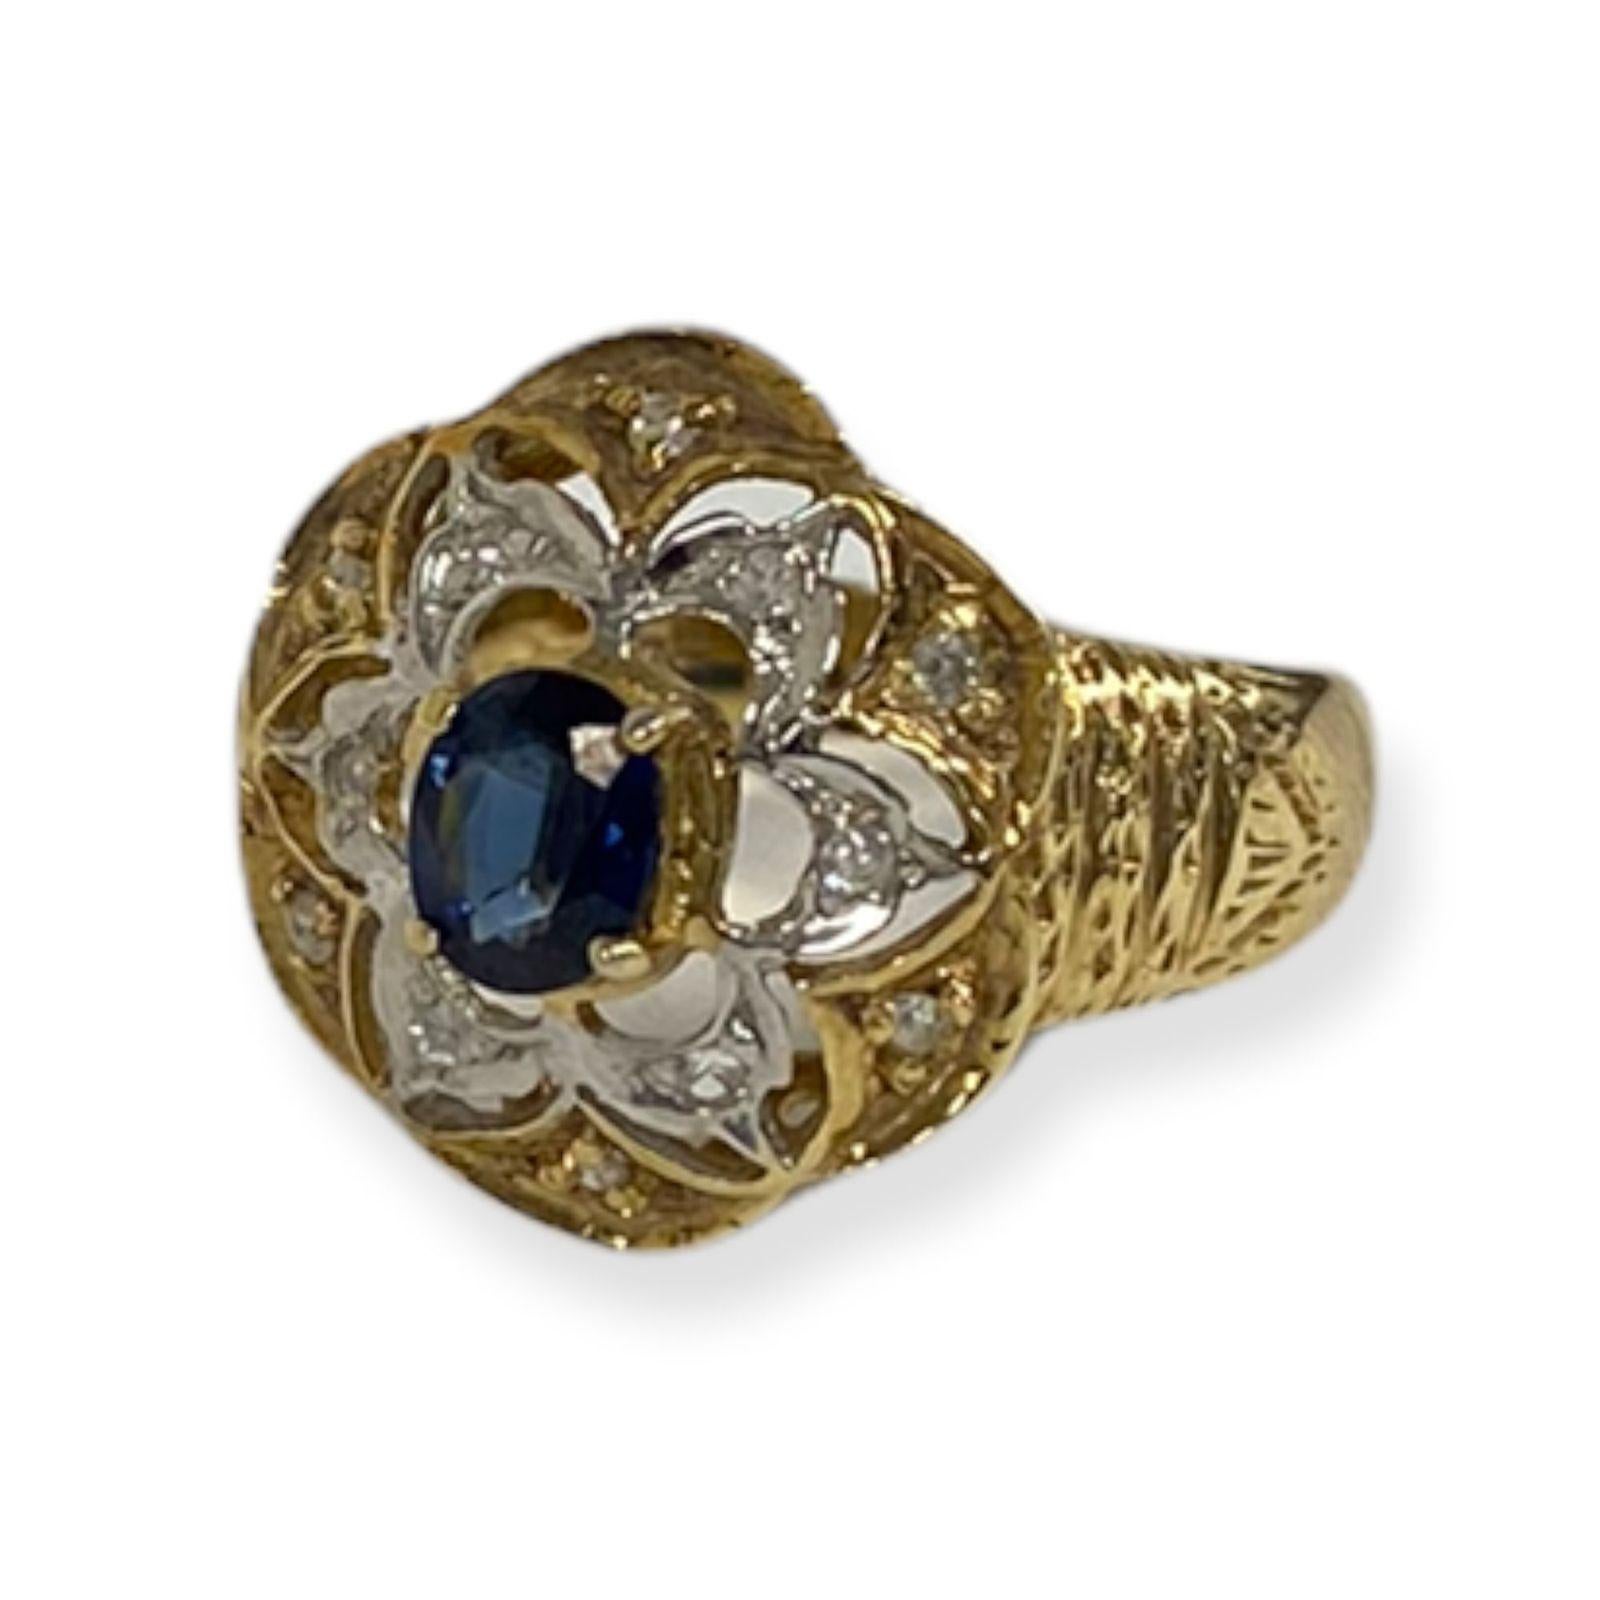 This spectacular ring from the Suzy L. Vintage-Inspired One-of-a-Kind collection features an array of white diamonds (.10cttw) accenting a center, oval-cut, blue sapphire (.25ct) in a 14k yellow gold setting. So intricate in detail and depth, this